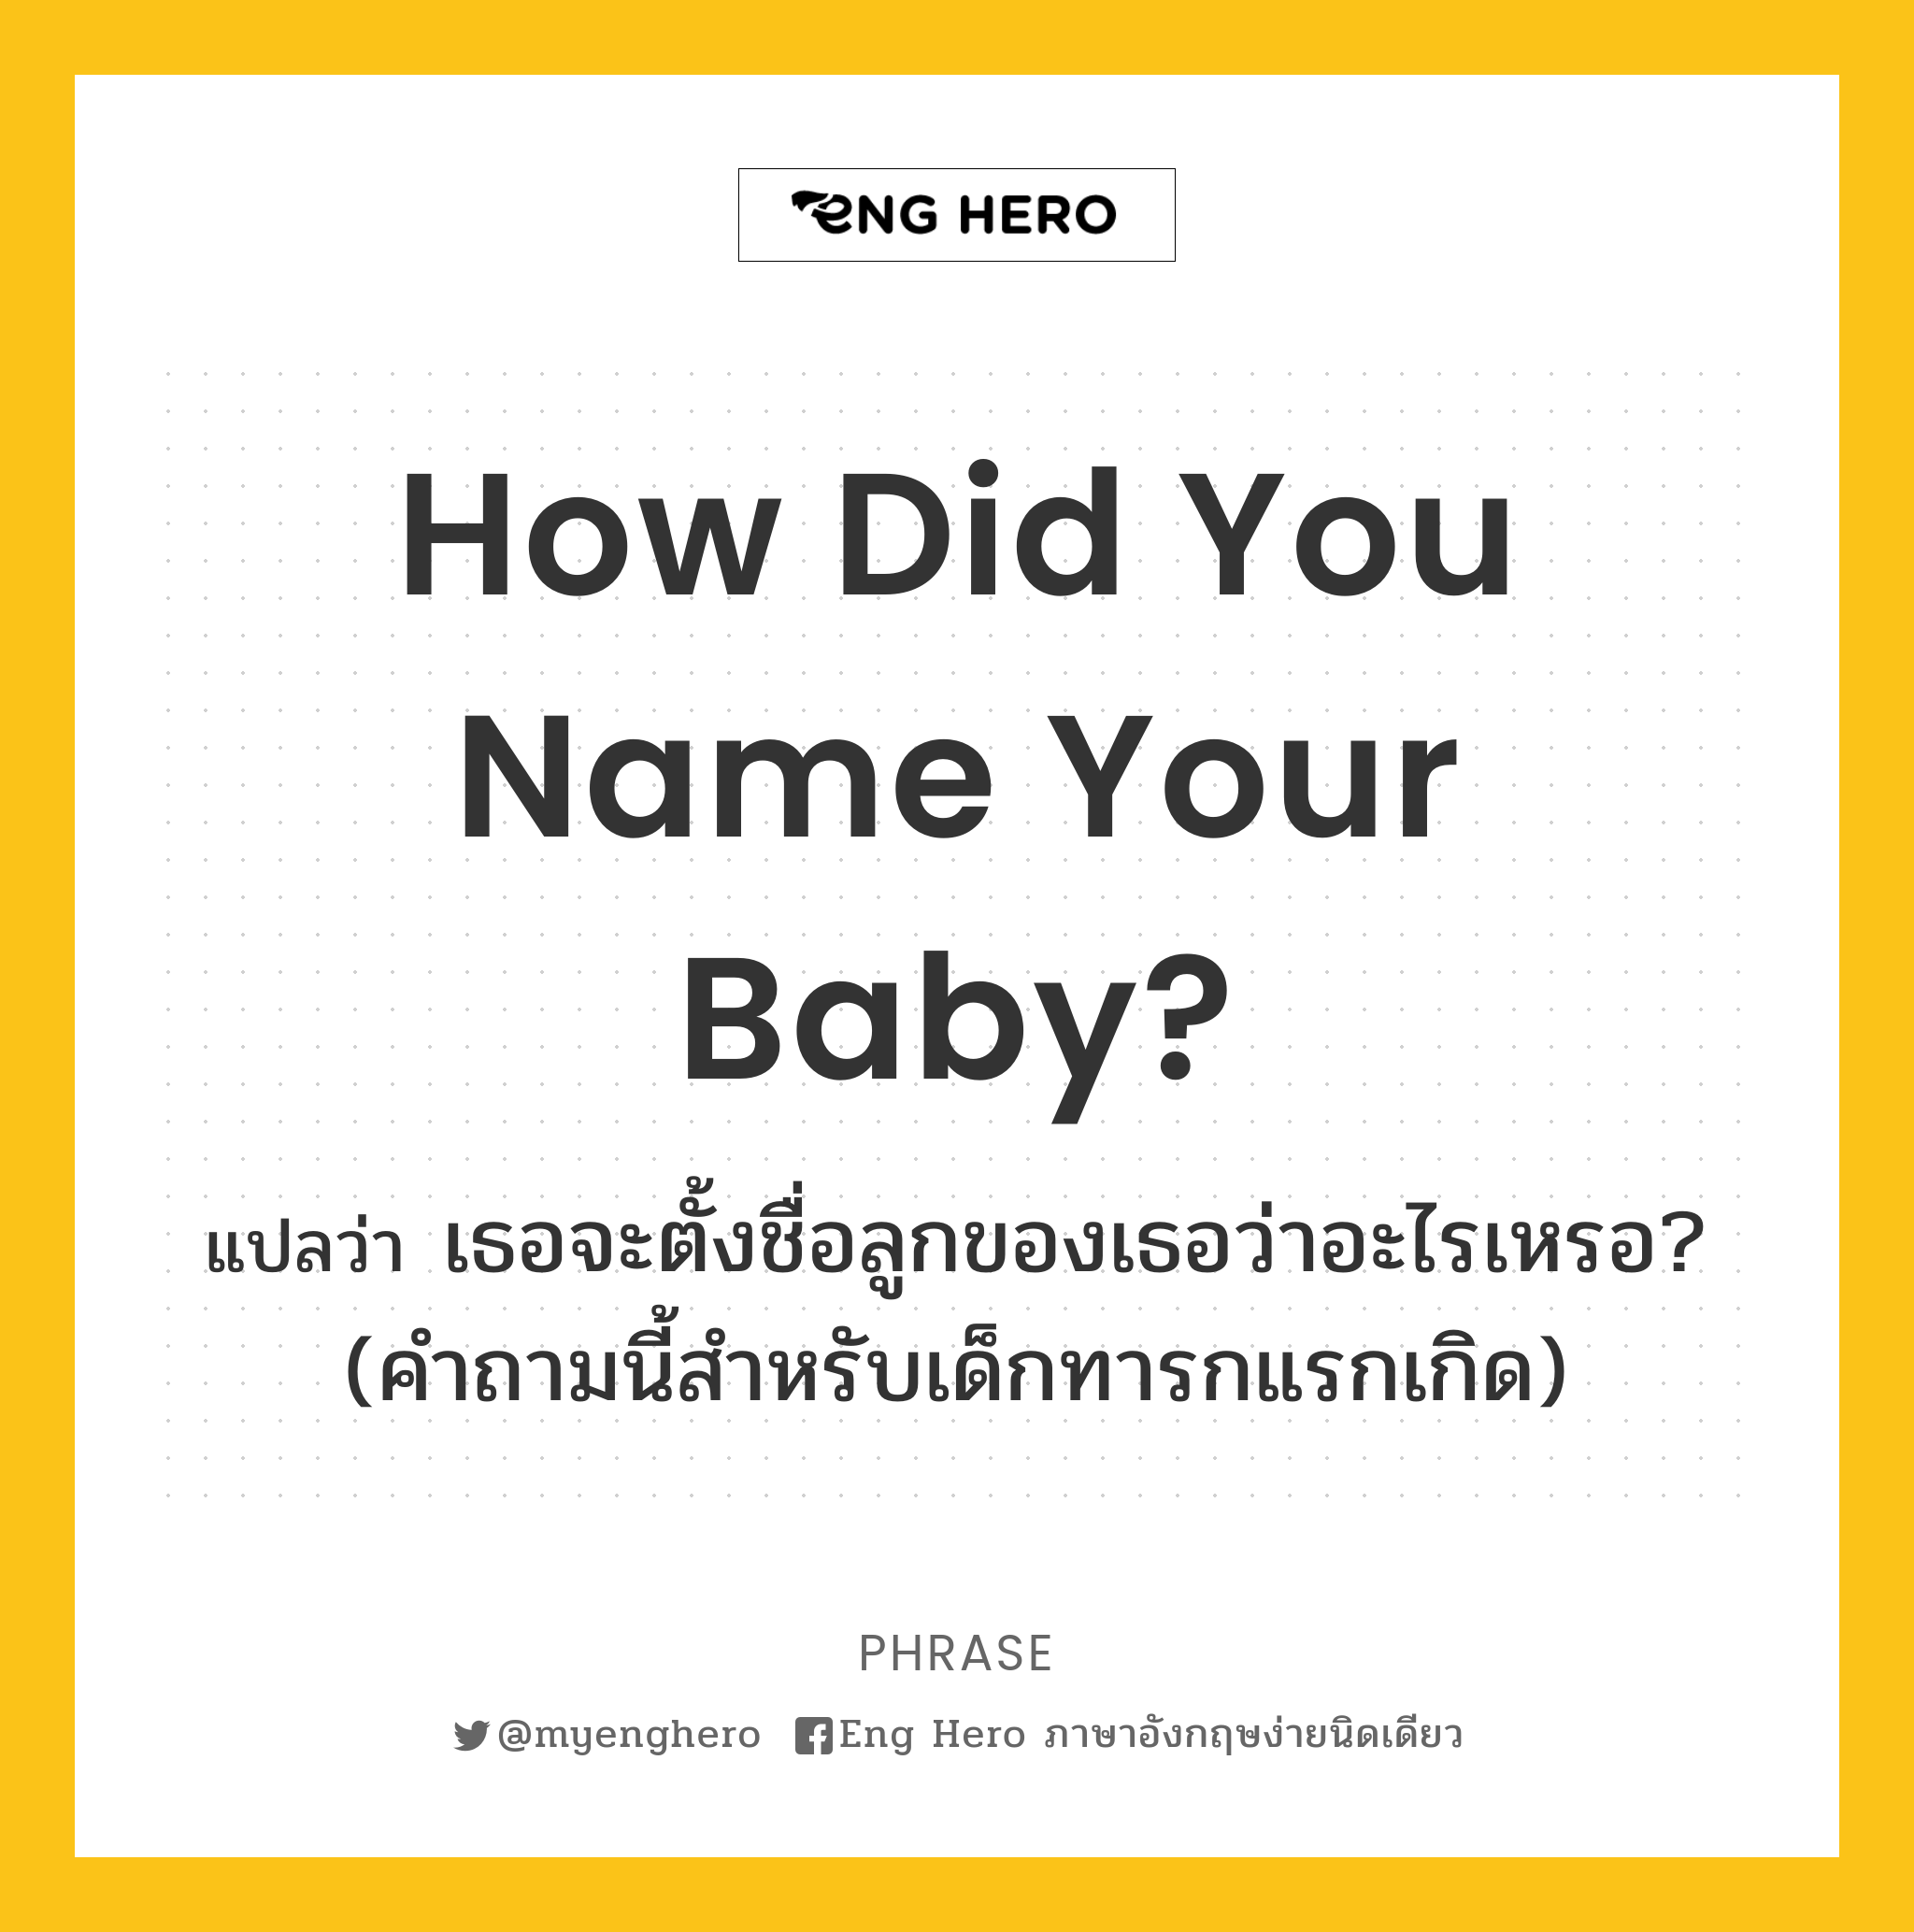 How did you name your baby?